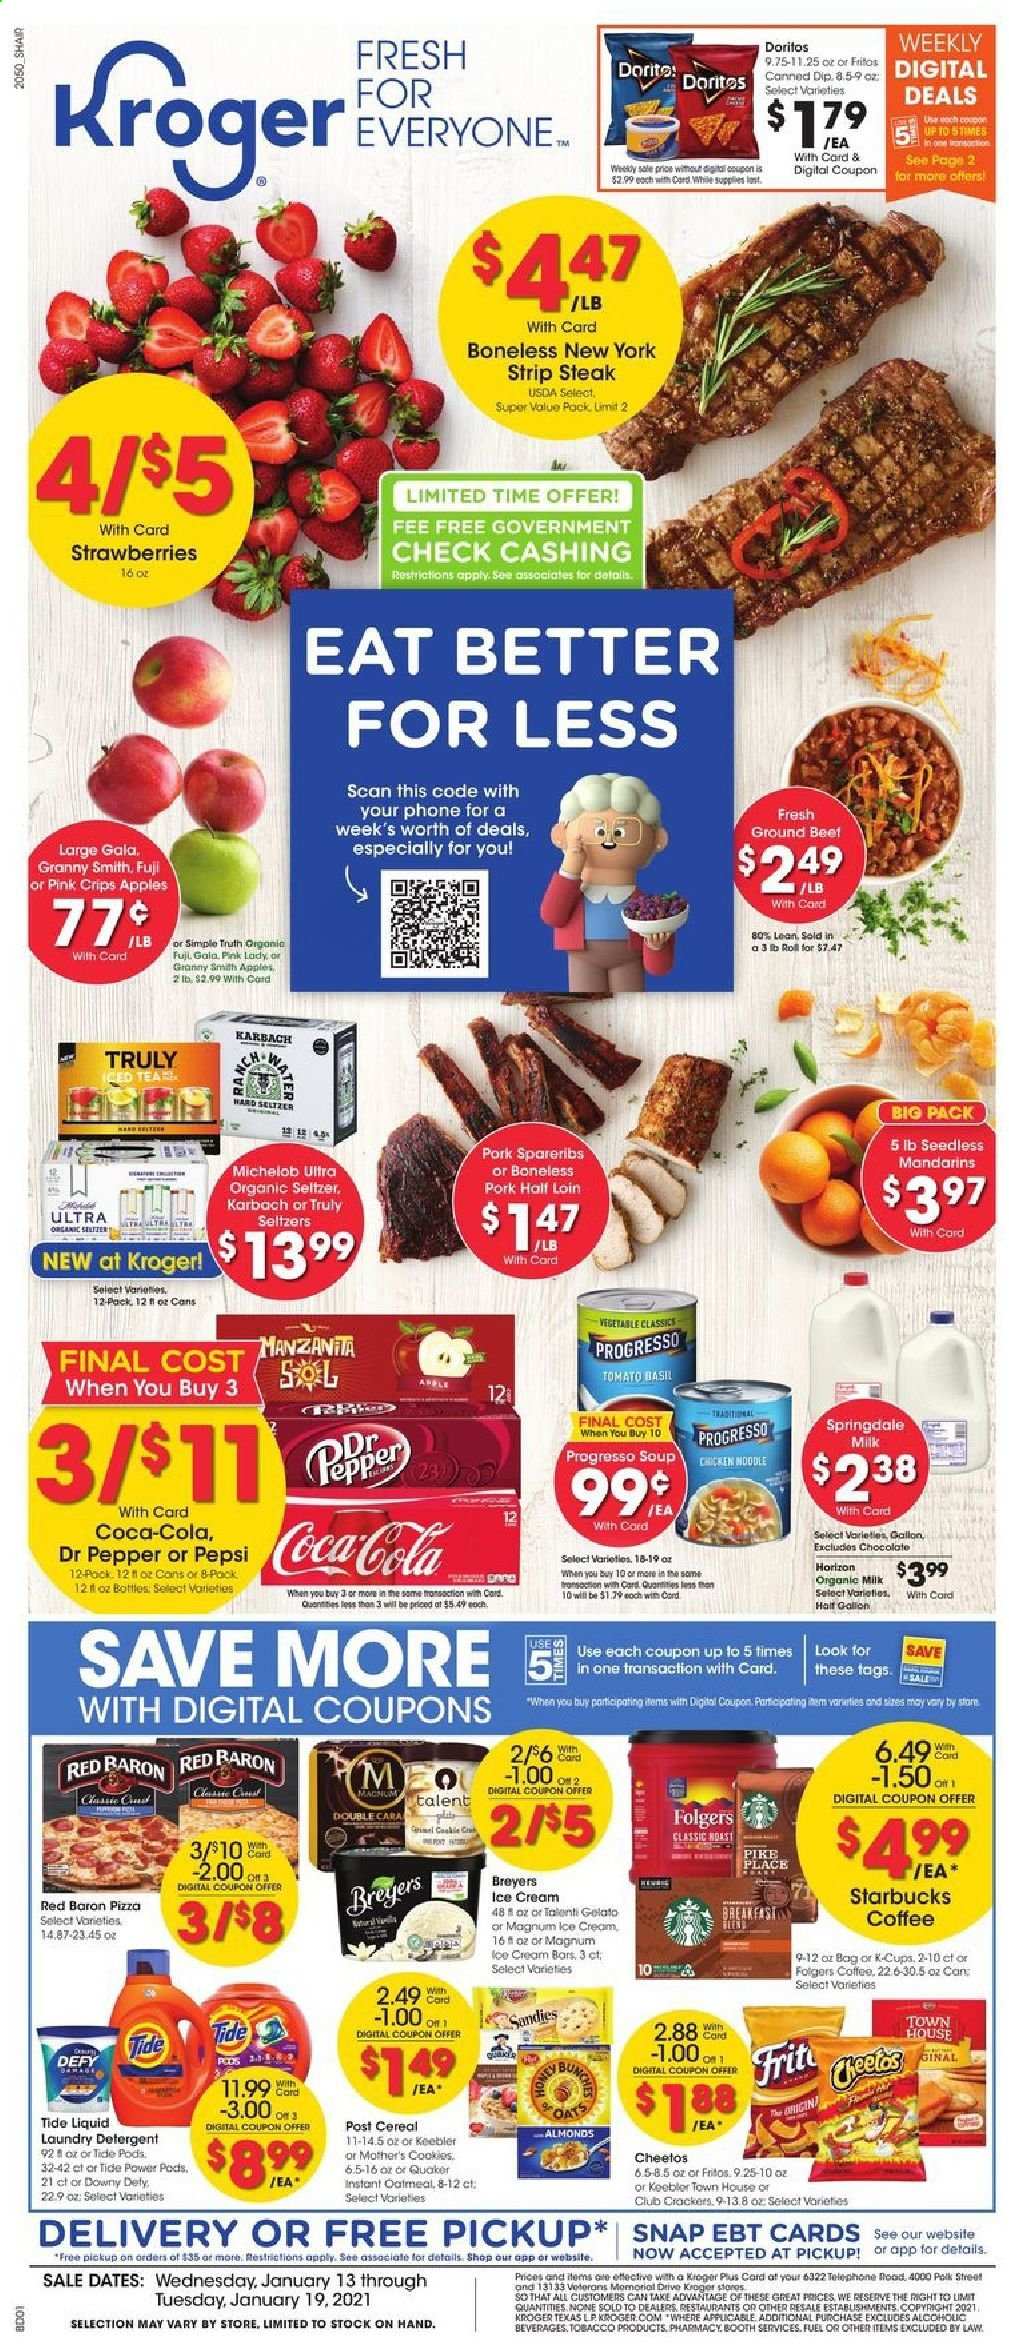 thumbnail - Kroger Flyer - 01/13/2021 - 01/19/2021 - Sales products - gallon, apples, pizza, Quaker, Progresso, organic milk, dip, ice cream, Talenti Gelato, gelato, strawberries, Red Baron, cookies, chocolate, crackers, Doritos, Cheetos, oatmeal, mandarines, cereals, Fritos, noodles, esponja, almonds, Coca-Cola, Pepsi, Dr. Pepper, seltzer water, coffee, Starbucks, Folgers, L'Or, TRULY, beer, Michelob, beef meat, steak, striploin steak, pork spare ribs, detergent, Tide, laundry detergent, lens. Page 1.